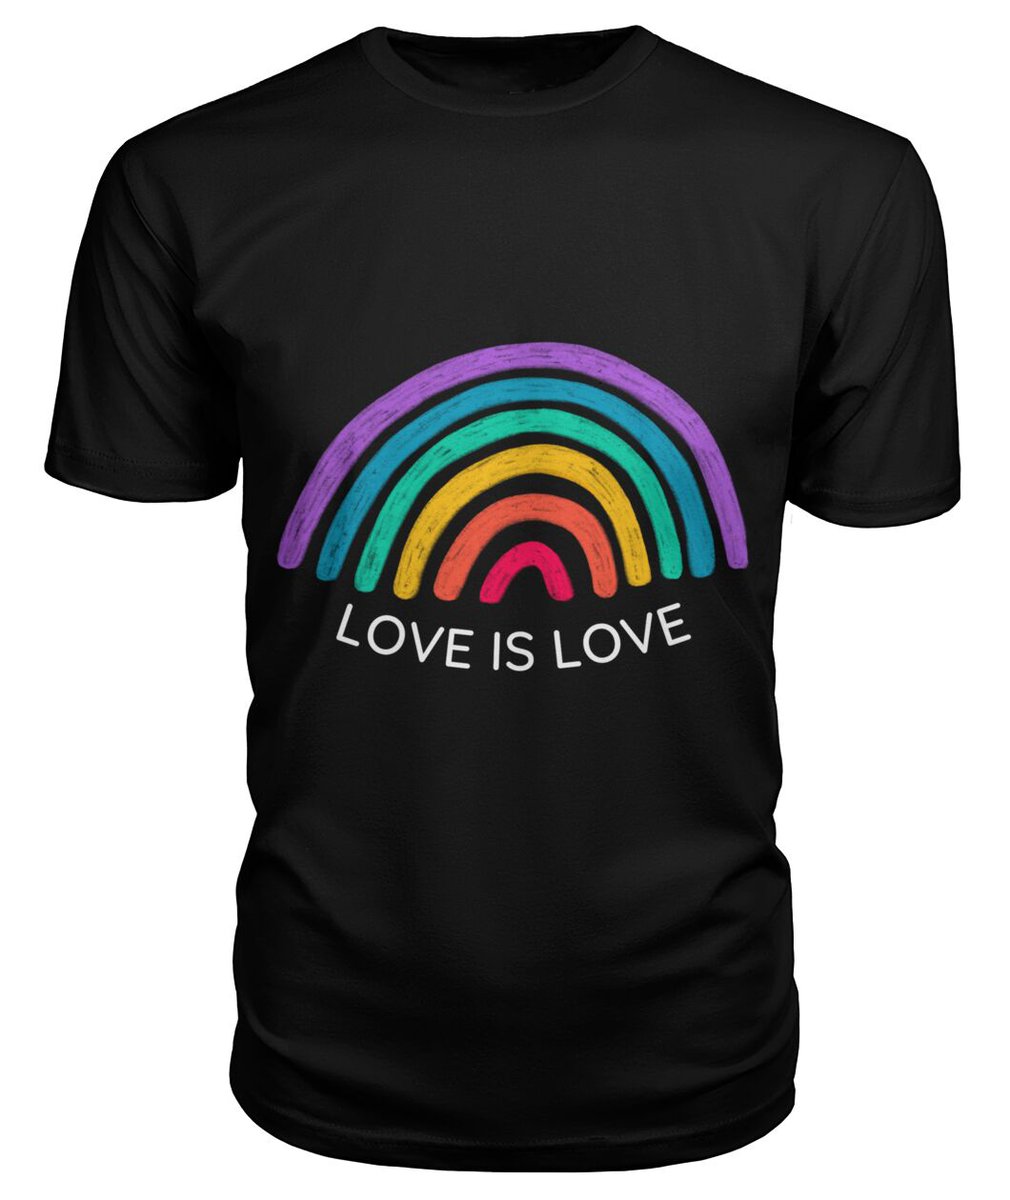 Love is Love T-Shirt 🖤 
✅️ Available in First Comment 💜

.
 #FridayFeeling #FridayVibes #Fridaymotivation #loveislove #FridayThoughts #FridaySpecial #LoveOnTour2023 #LoveOnTour